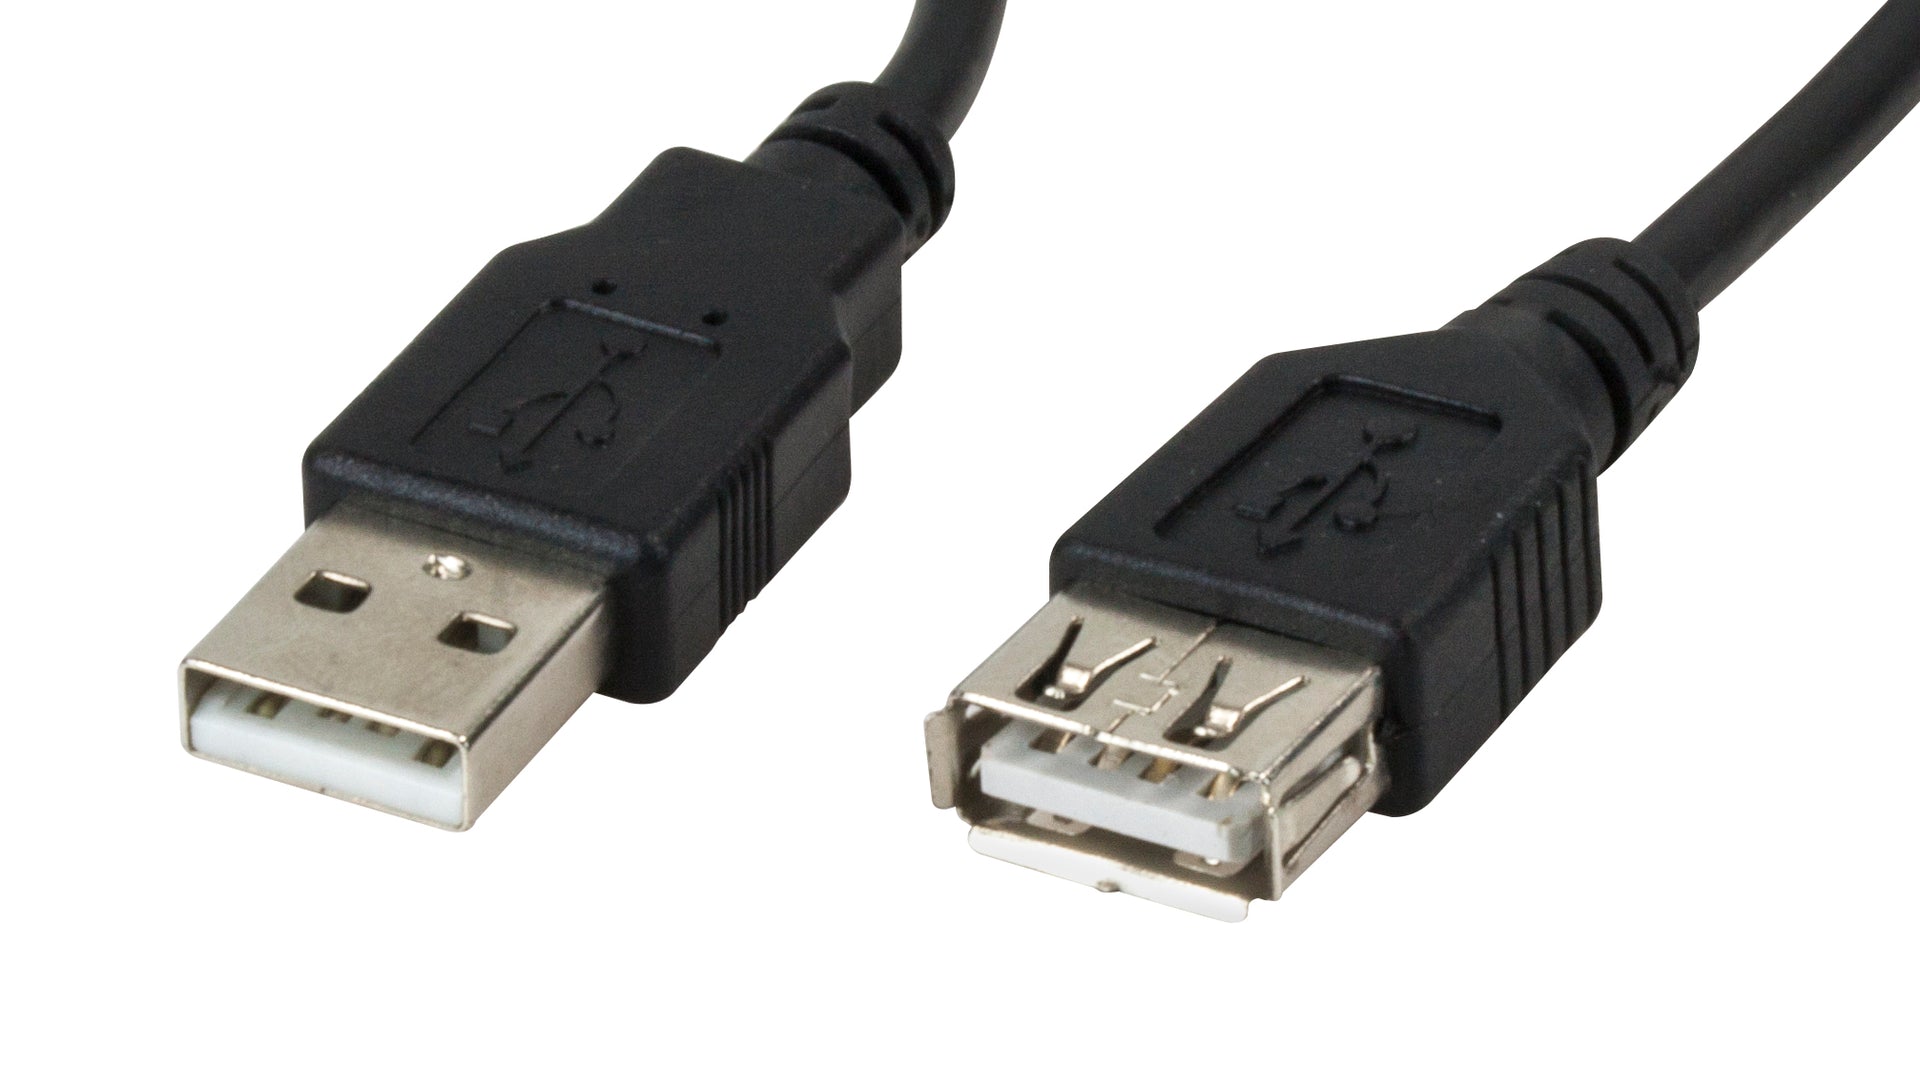 XTECH USB 2.0 Male to Female Cable